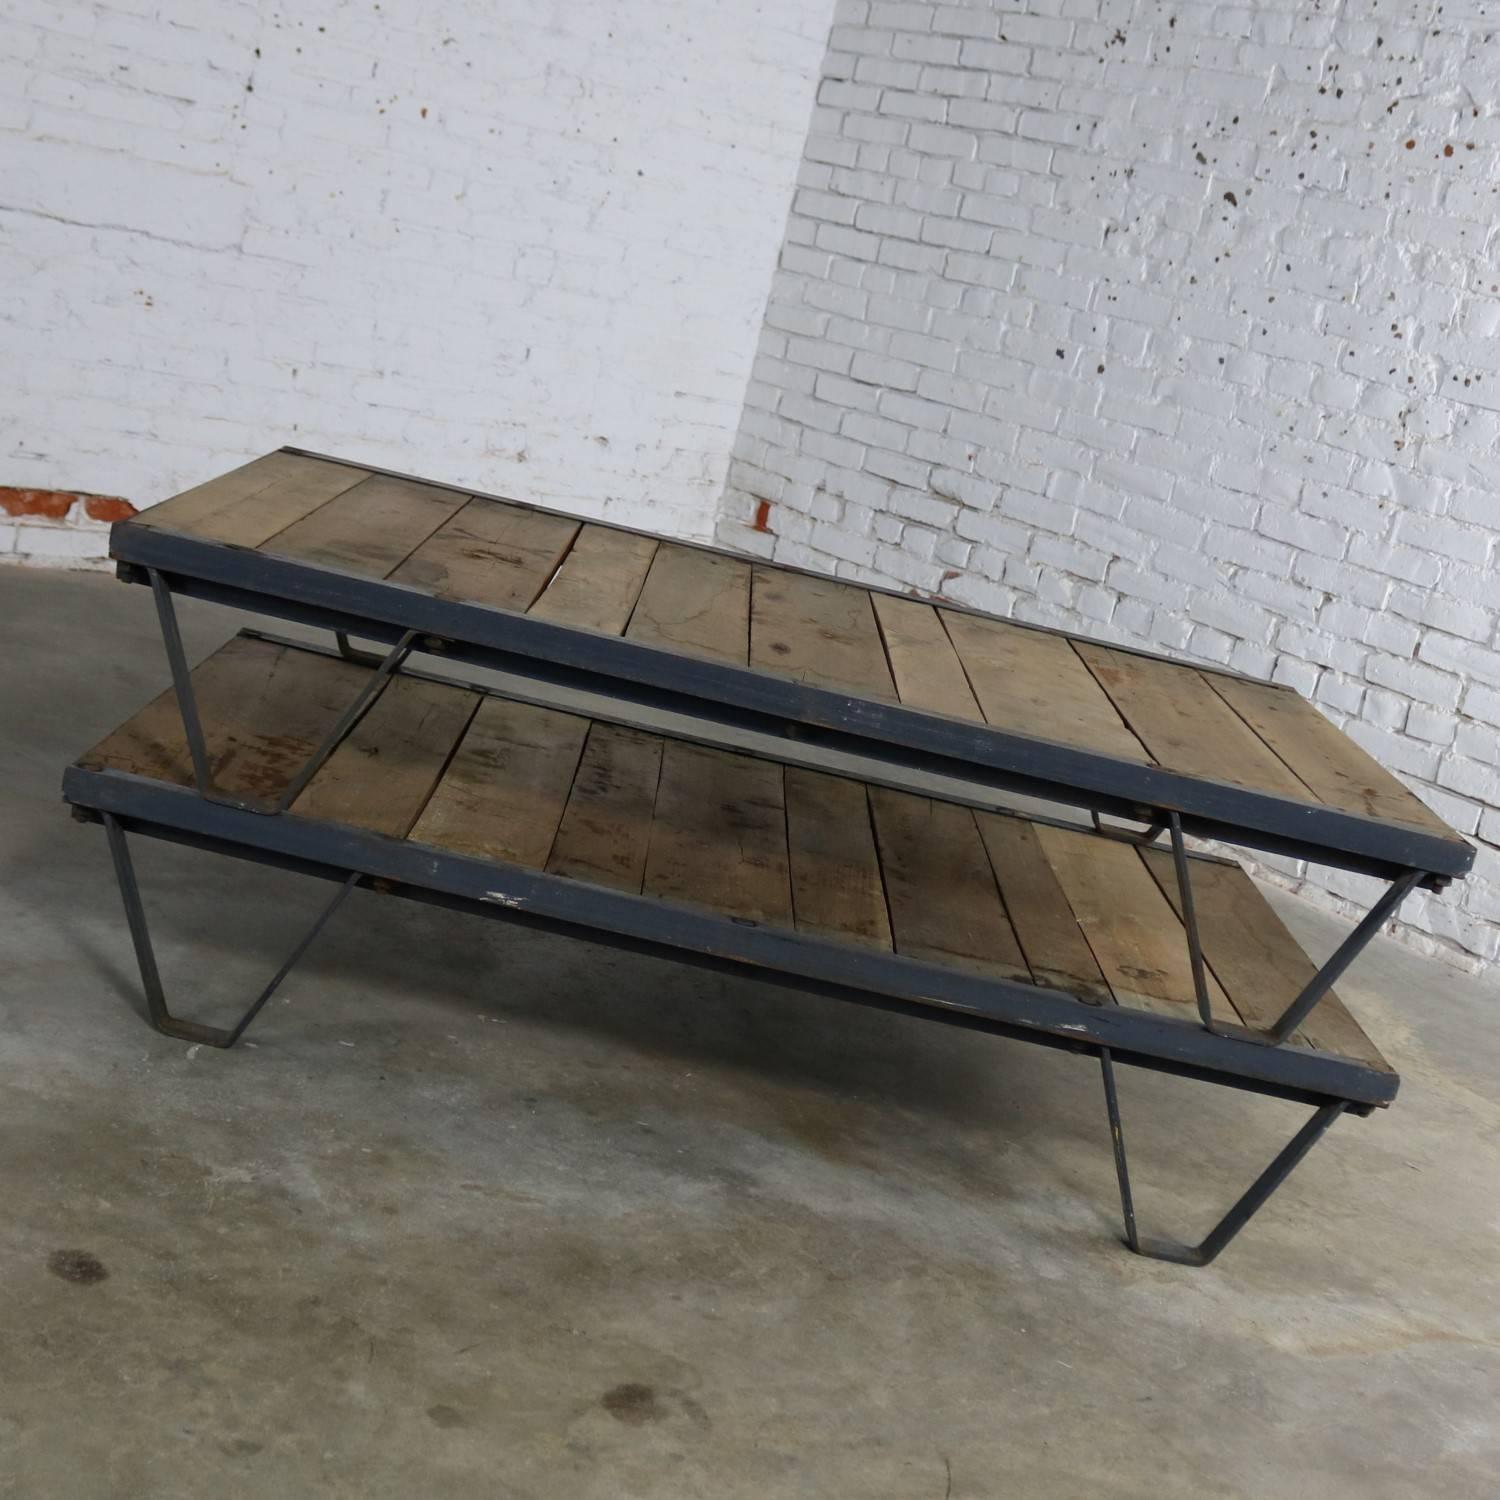 Awesome American Industrial pair of pallets in oak, maybe ash, and steel for use as a fabulous coffee table. They are in very solid sturdy condition with loads of age patina, circa 1930s or prior.

These are quite the pair and make the most